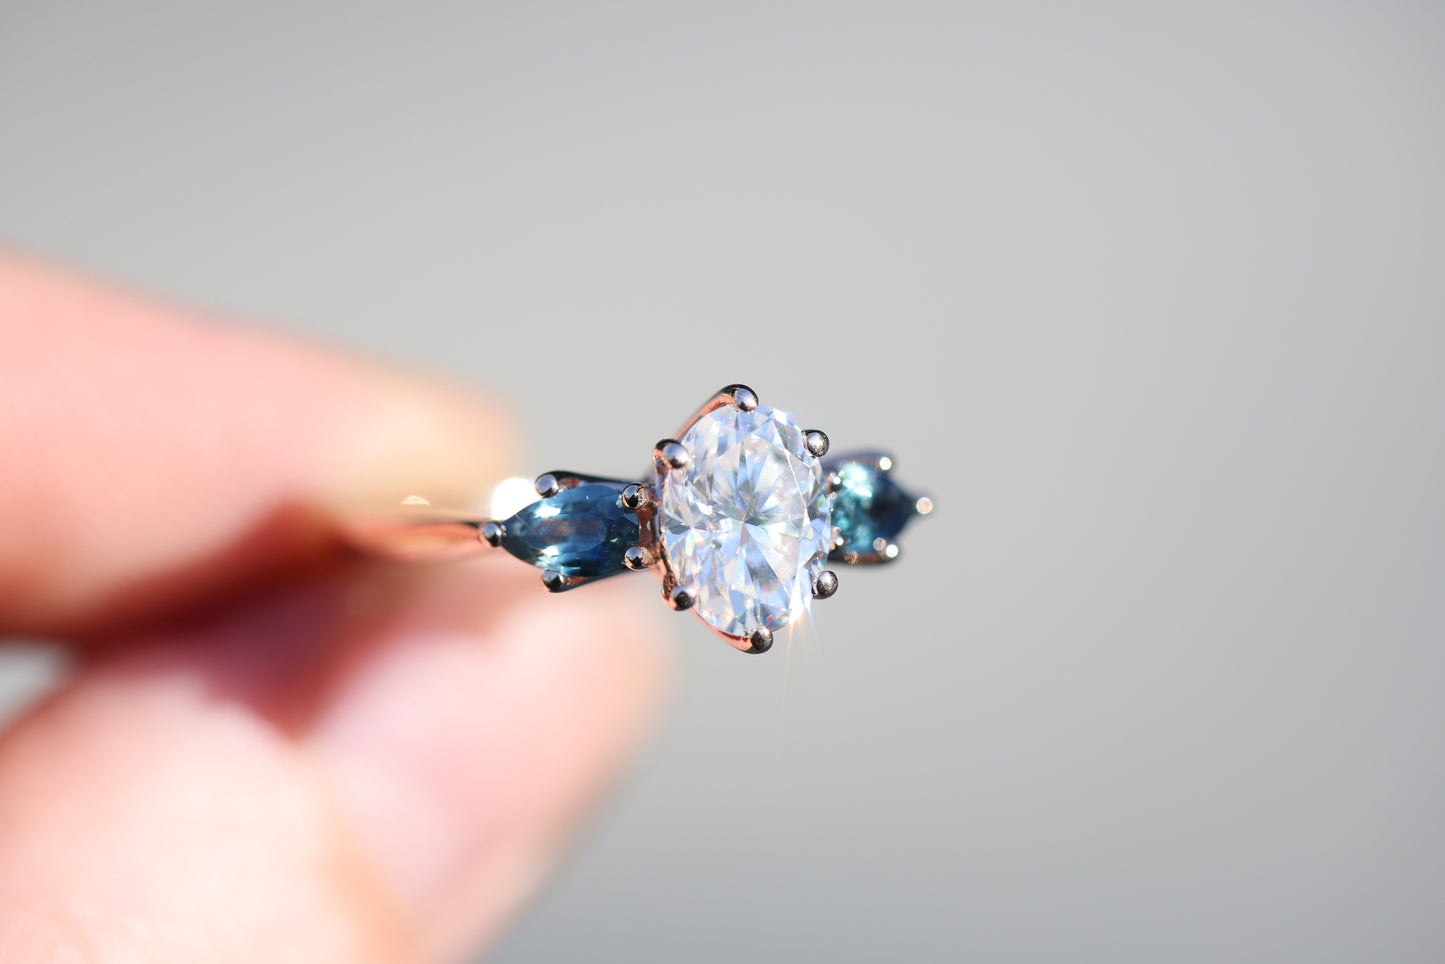 Lattice three stone setting with moissanite and blue teal sapphires